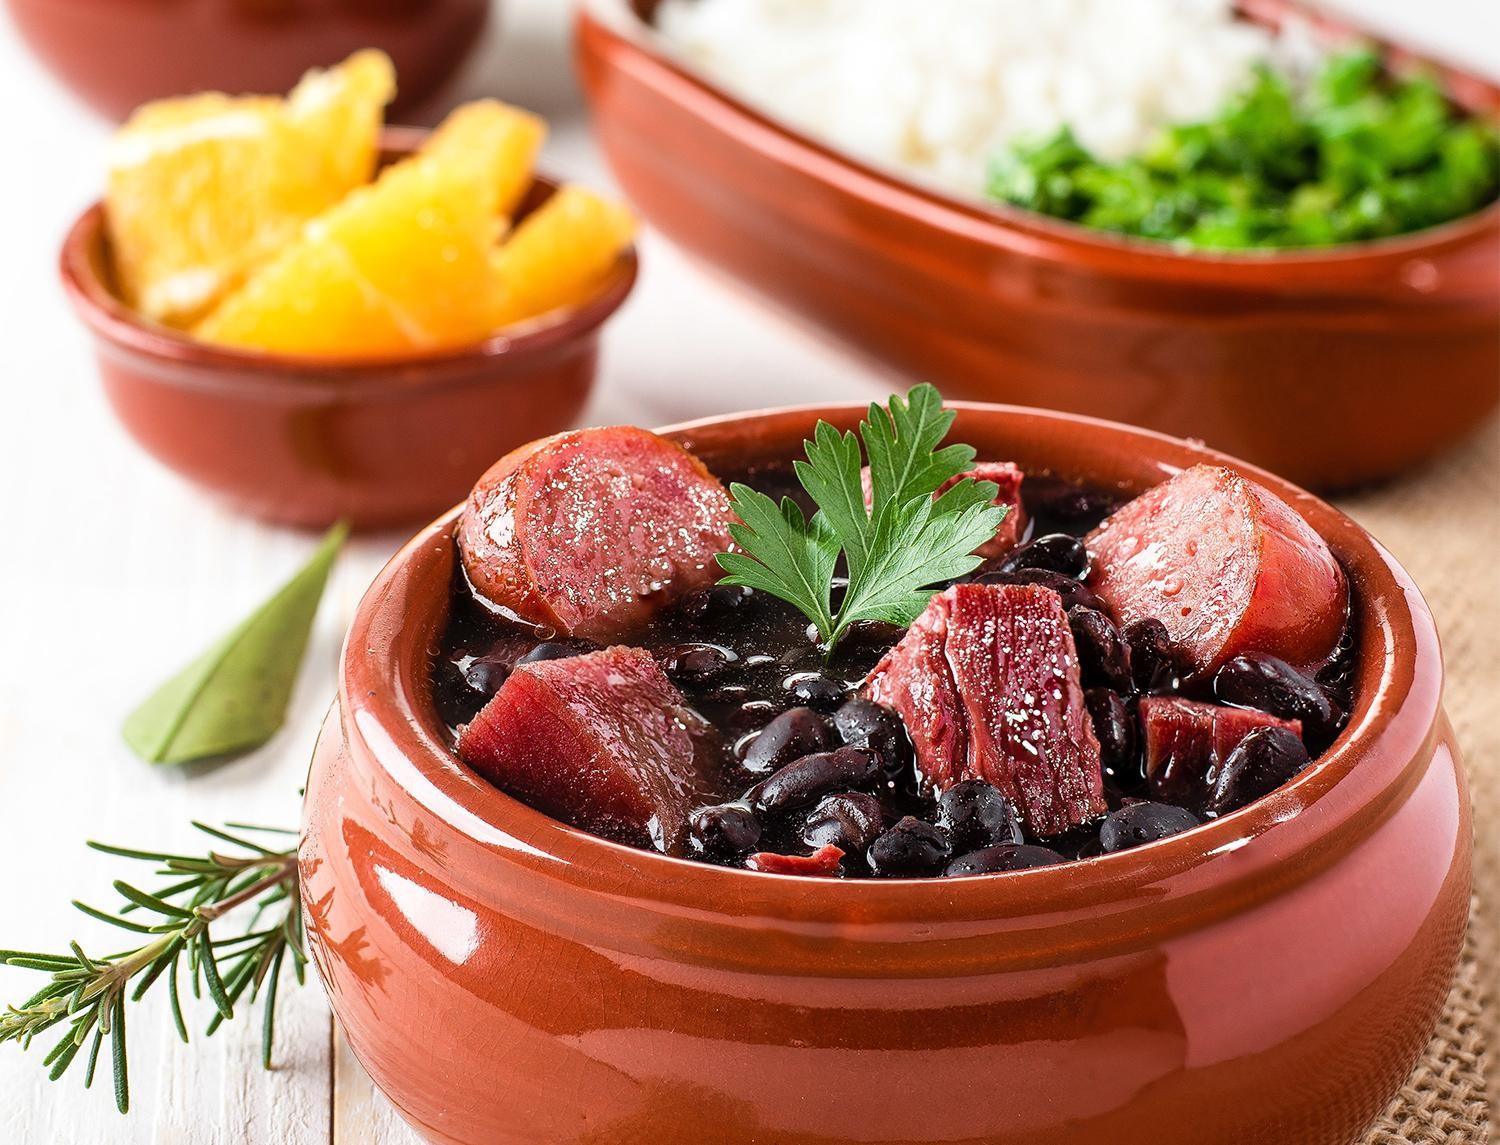 Join Us At Chima Steakhouse For Our All New Feijoada Saturday’s